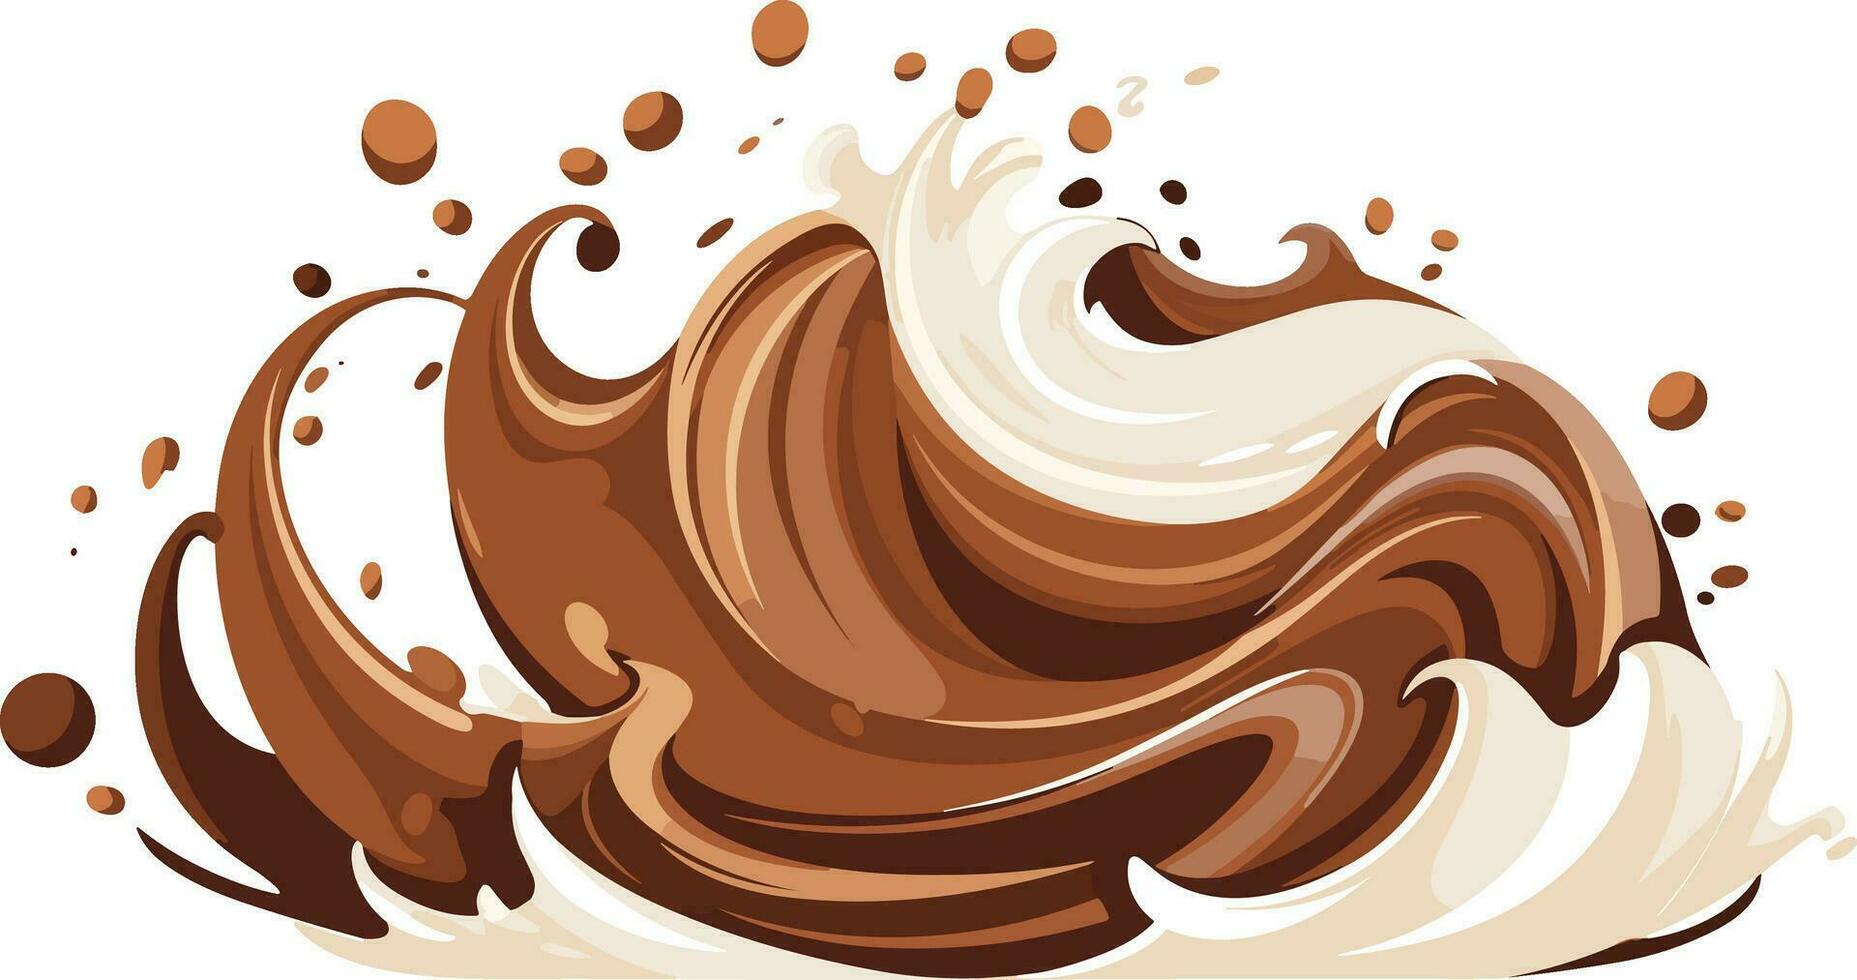 chocolate splashes waves illustration in isolated background vector